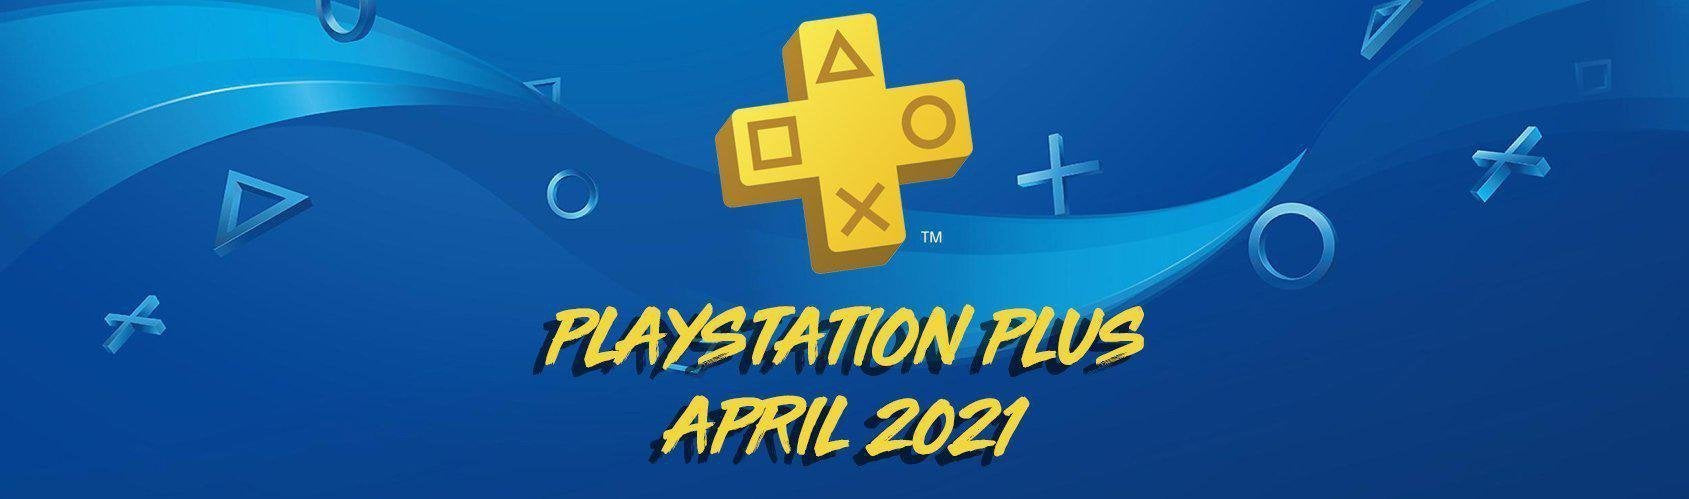 PlayStation Plus Games of April Revealed-Custom Controllers UK